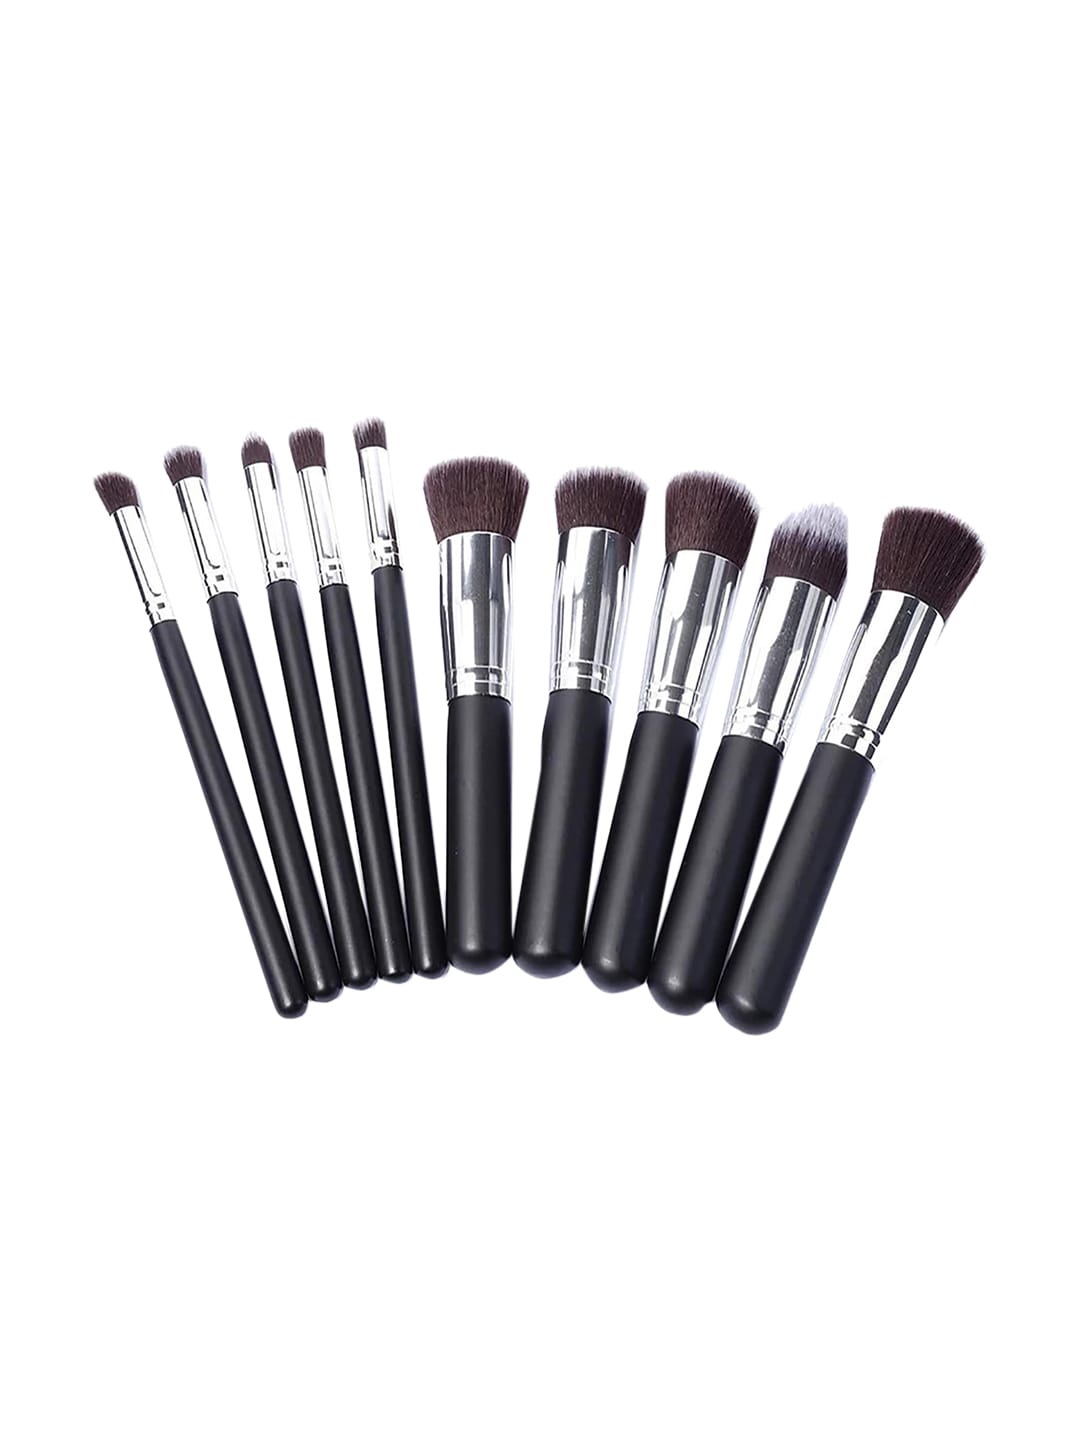 Ronzille Set of 10 Black Soft Makeup Brushes Price in India